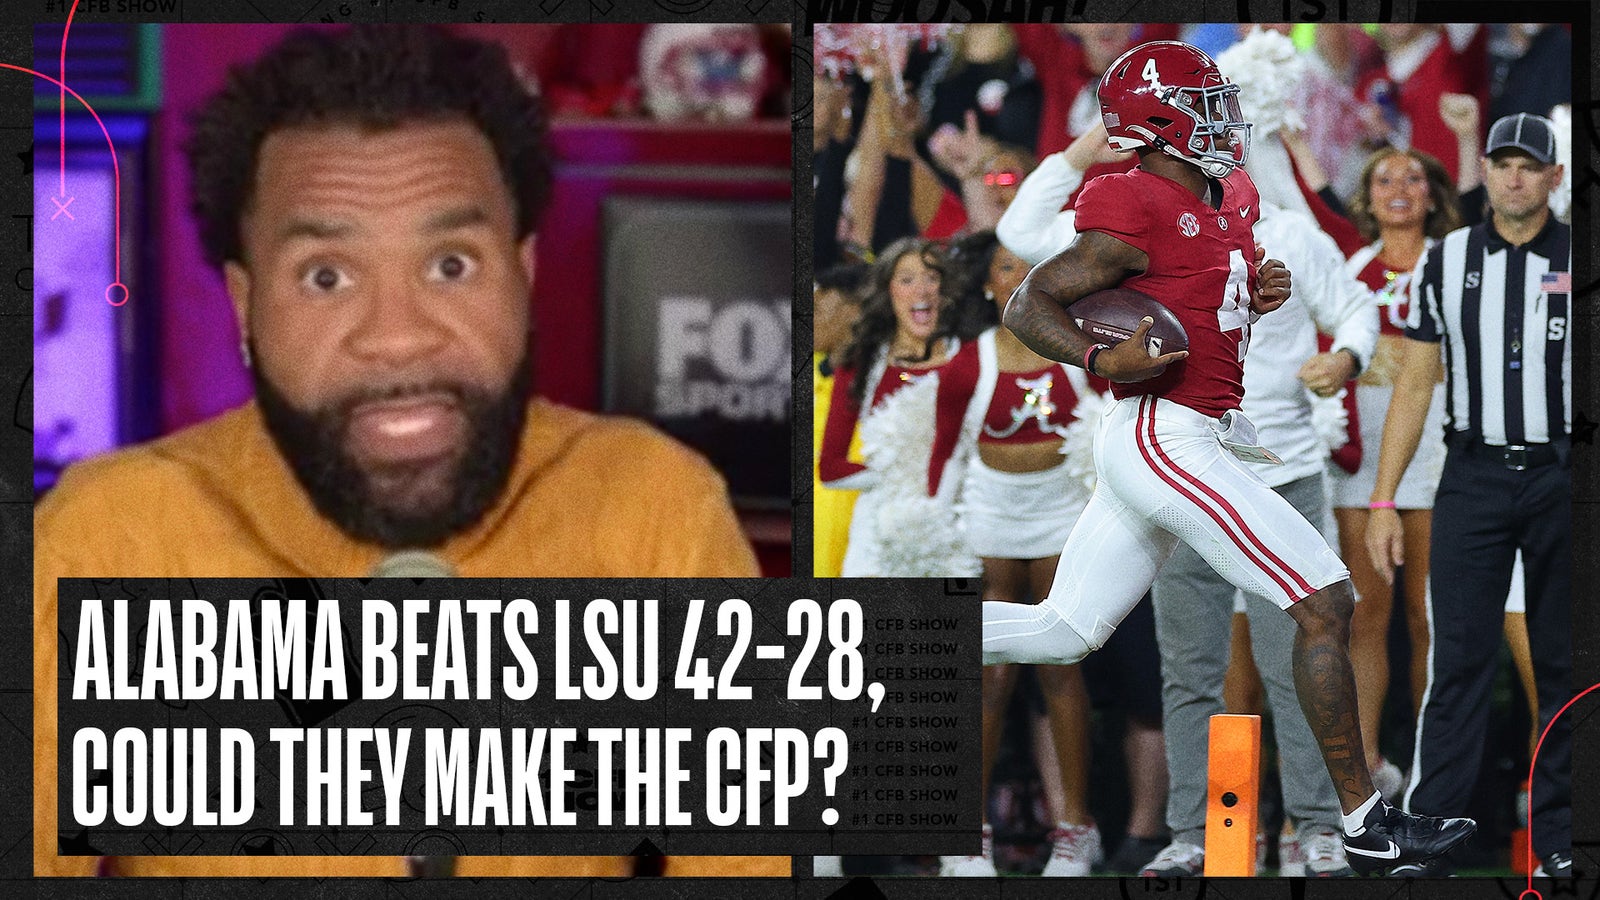 RJ Young reacts to the Alabama Crimson Tide beating the LSU Tigers